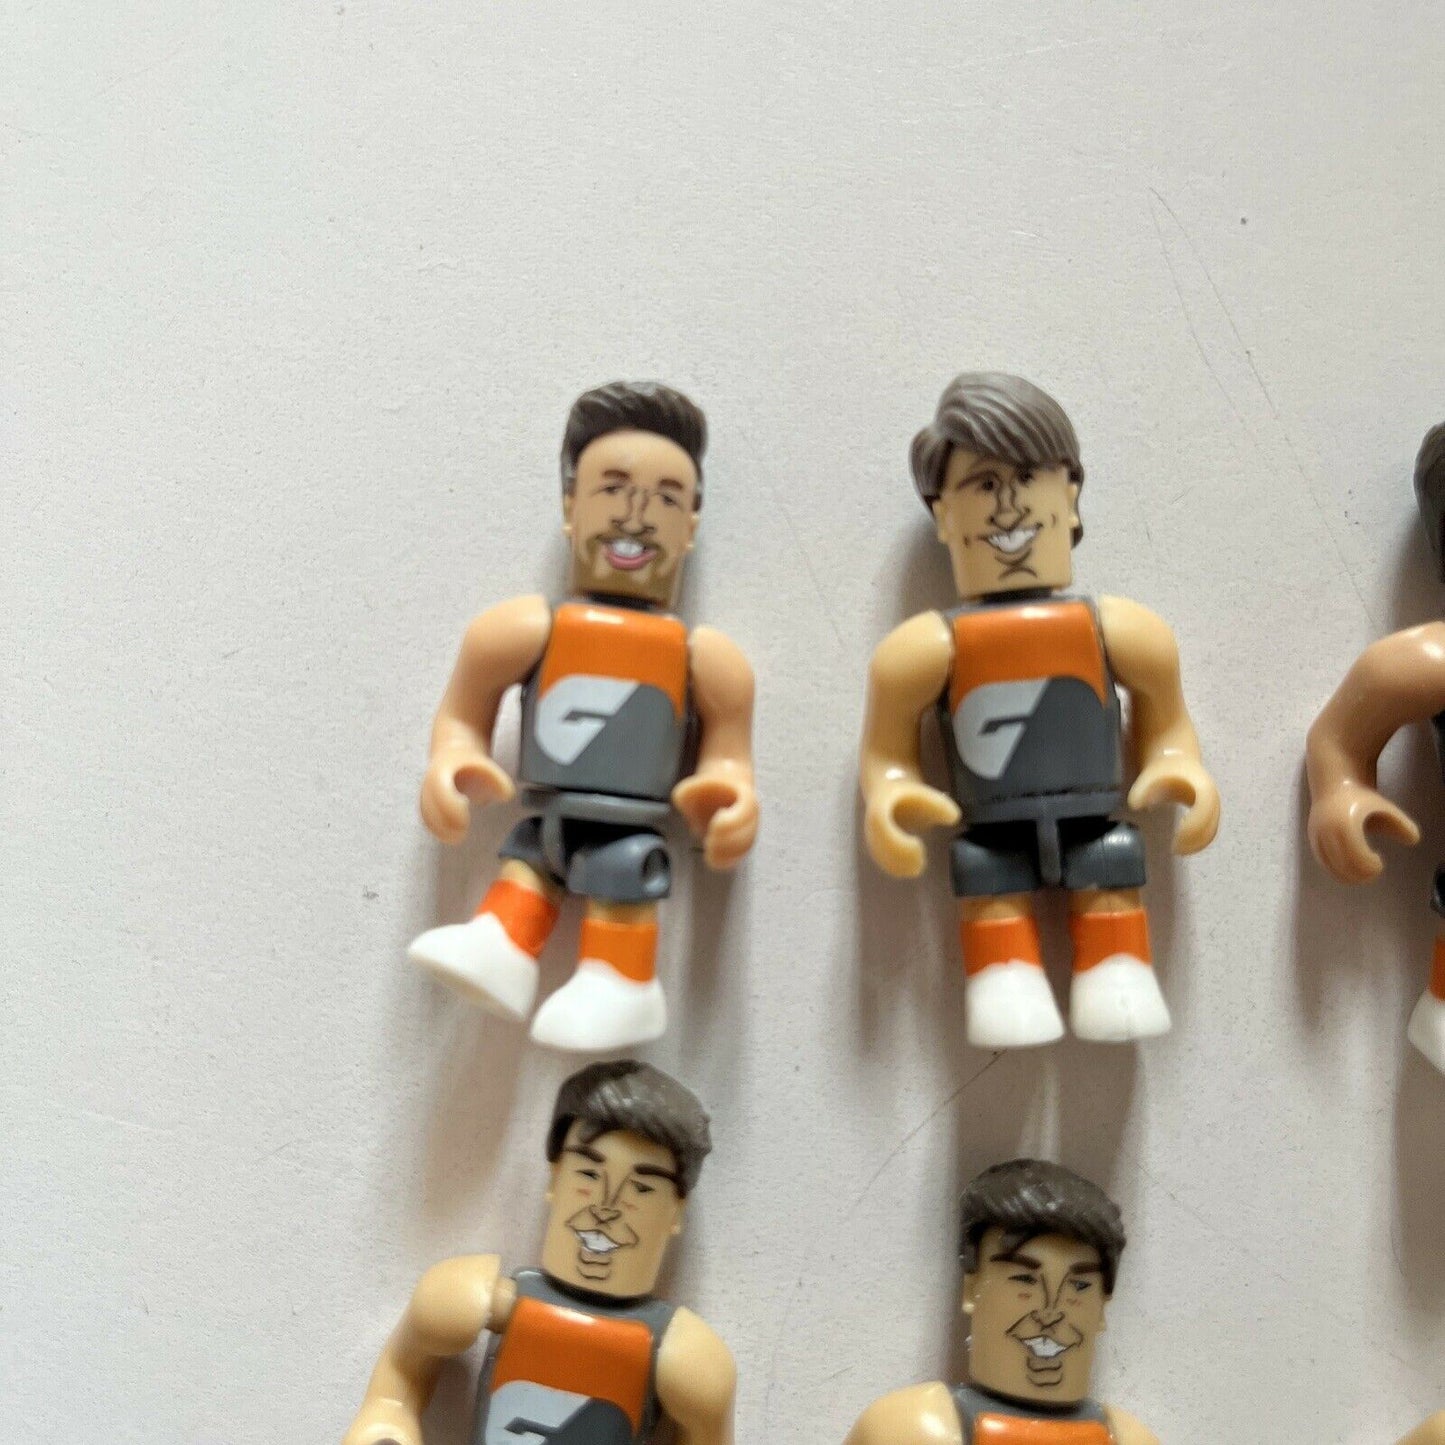 Afl Micro-figures 2015 Series 2 Greater Western Sydney - Ward, Griffen, Cameron